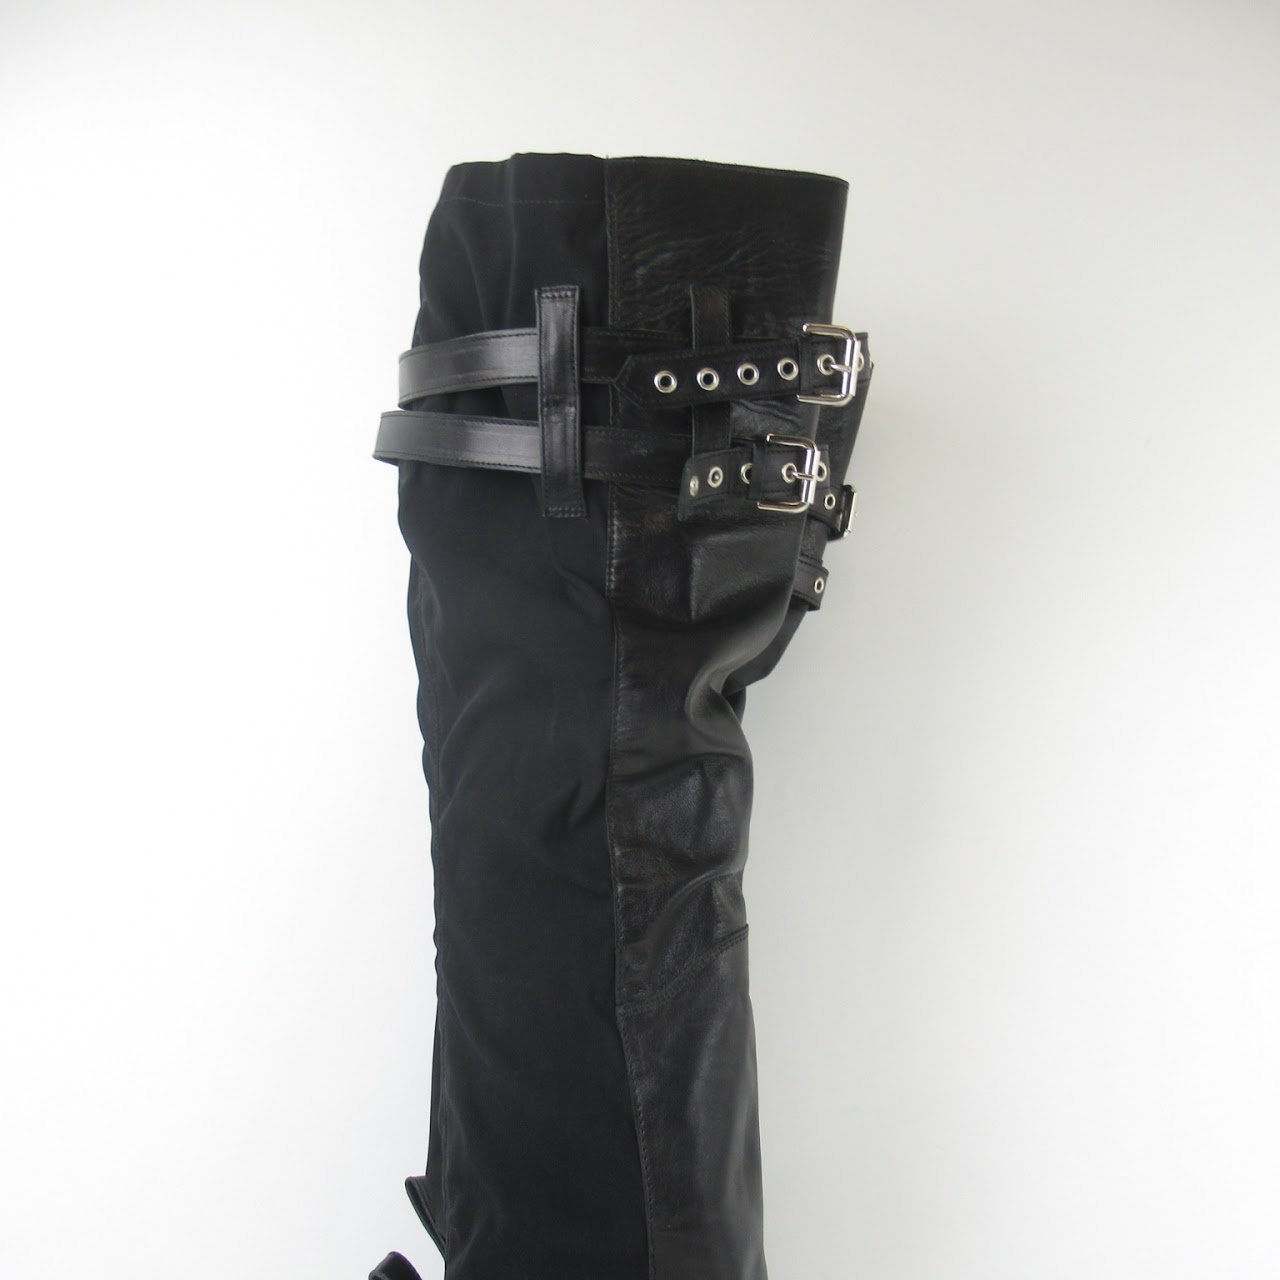 Marques Almieda Thigh High Boots